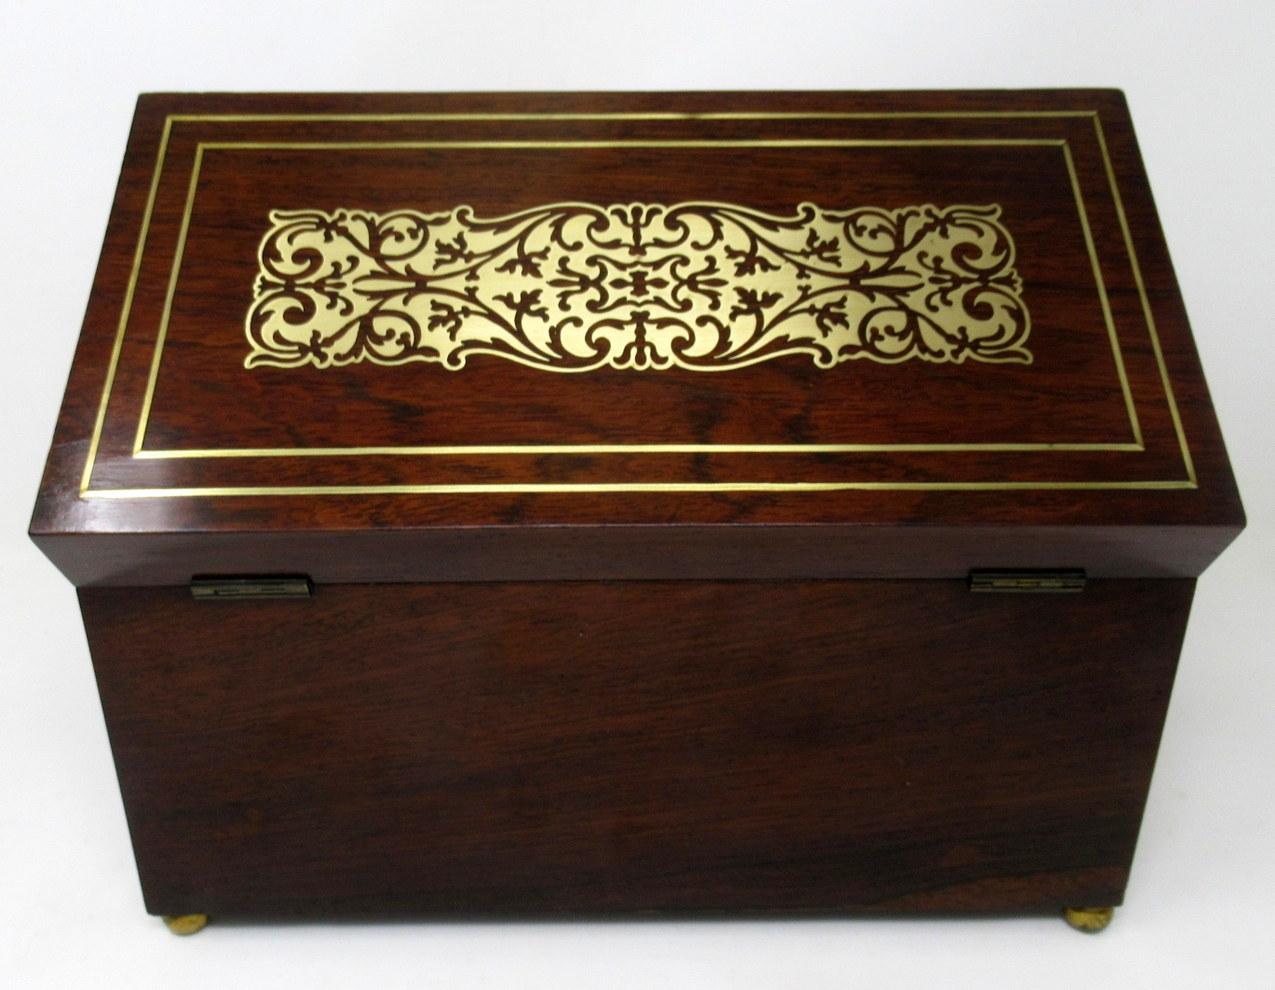 Antique Brass Inlaid English Regency Mahogany Double Tea Caddy Box 19th Century In Good Condition For Sale In Dublin, Ireland